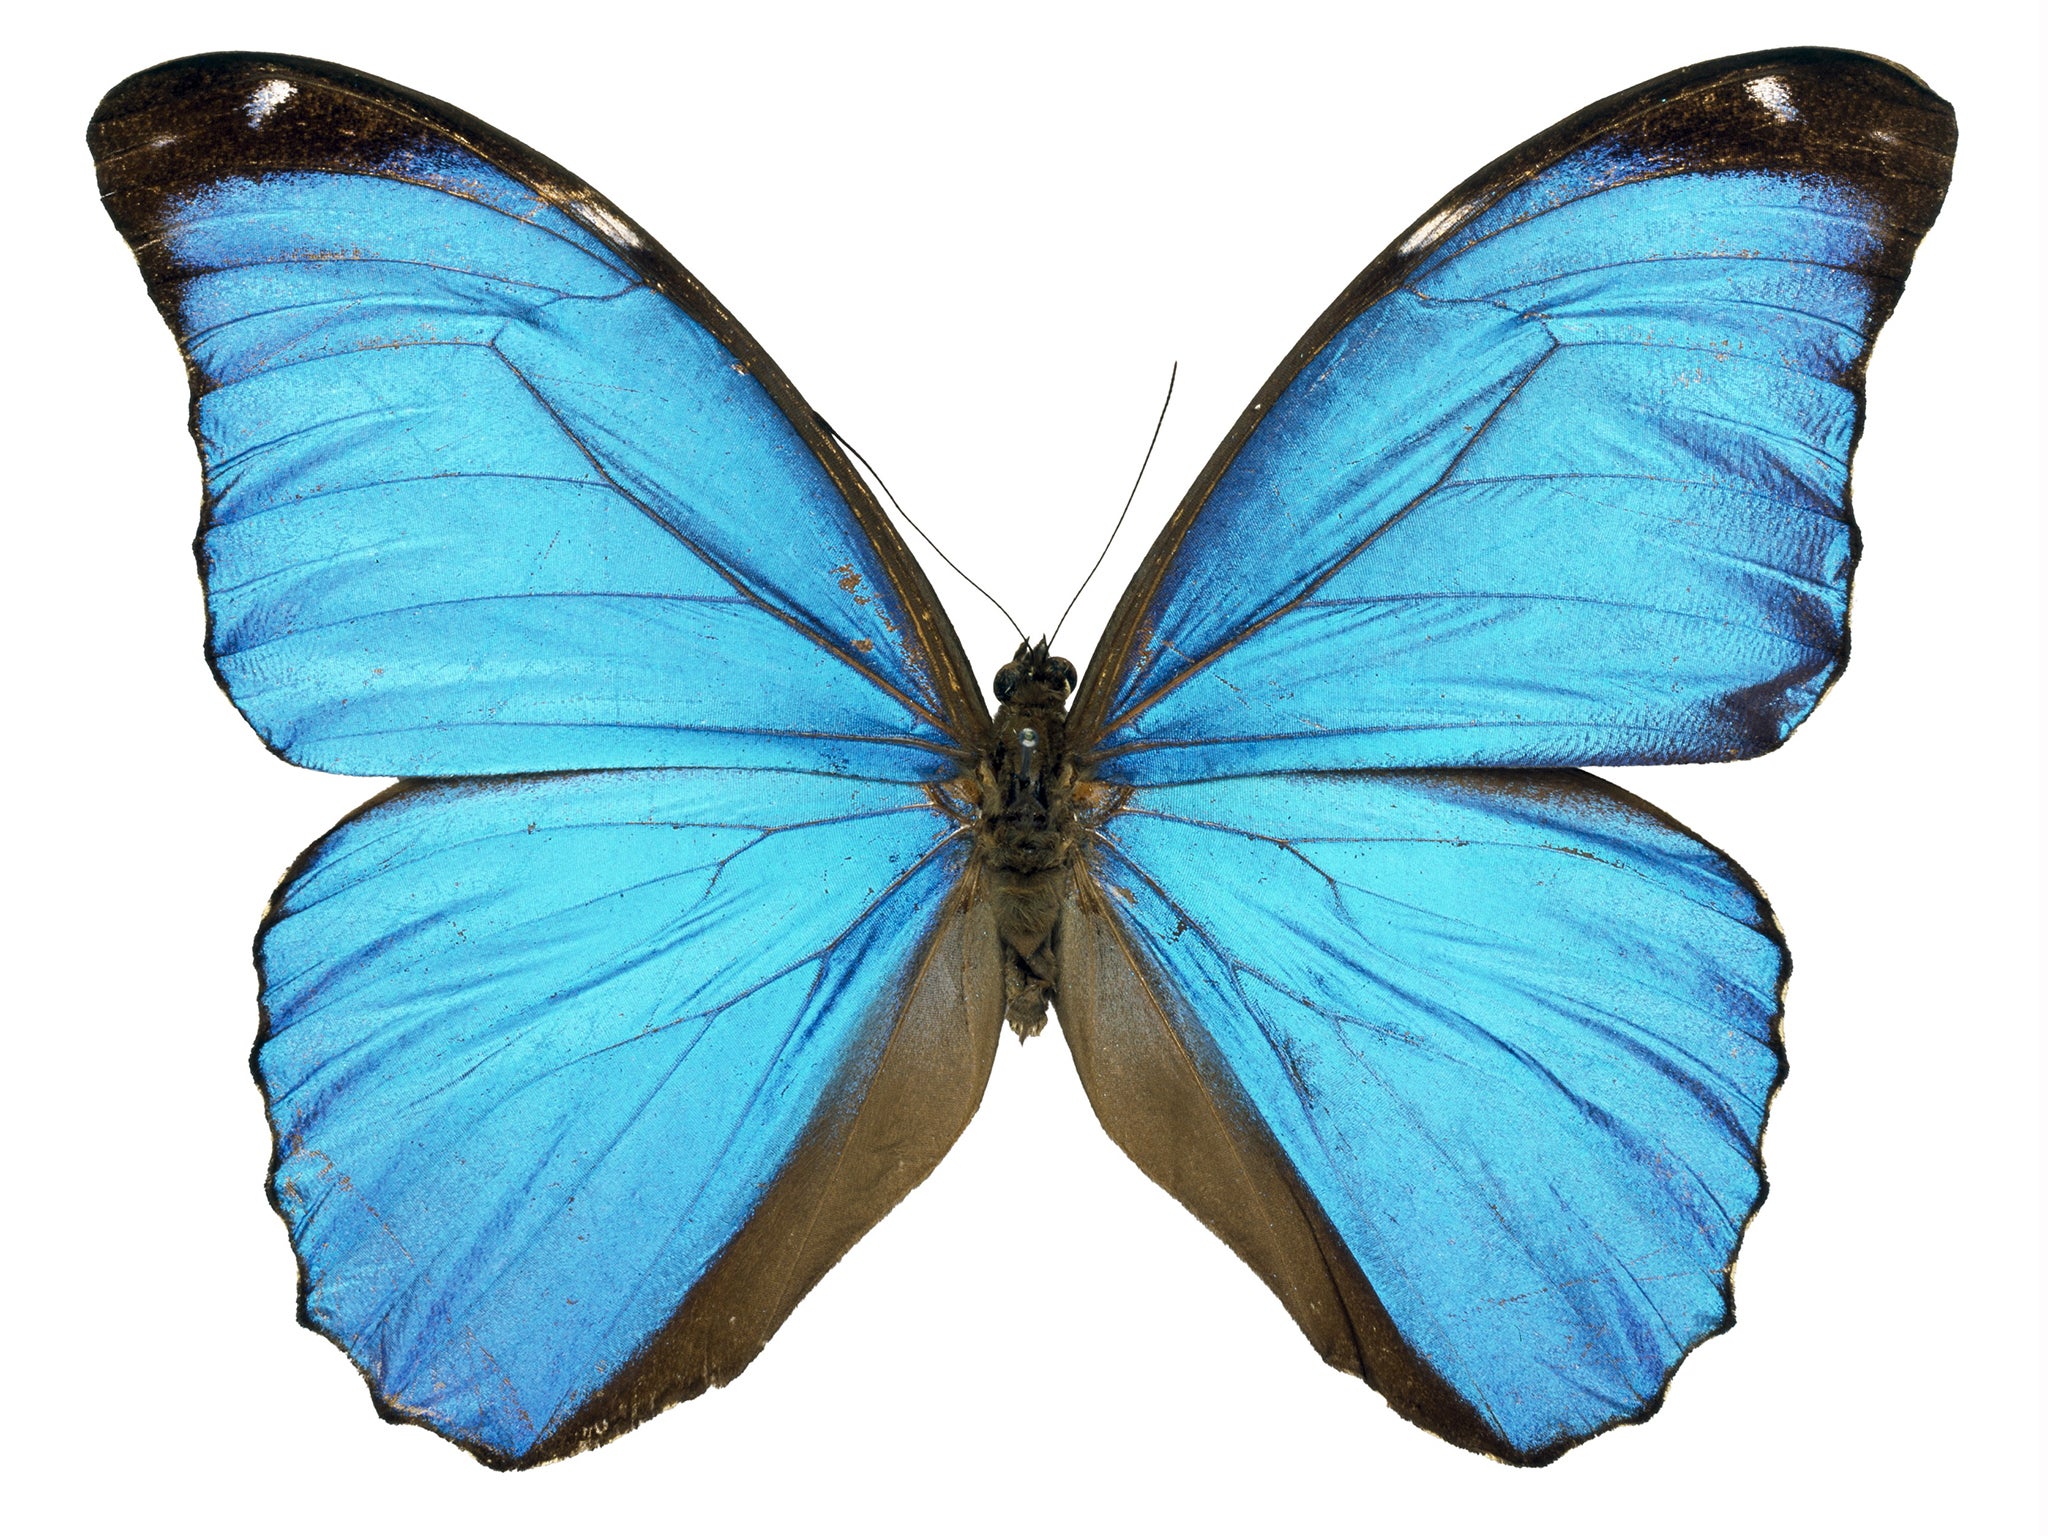 Professor Andrew Parker from the Natural History Museum has cultured cells from a blue morpho butterfly’s wing